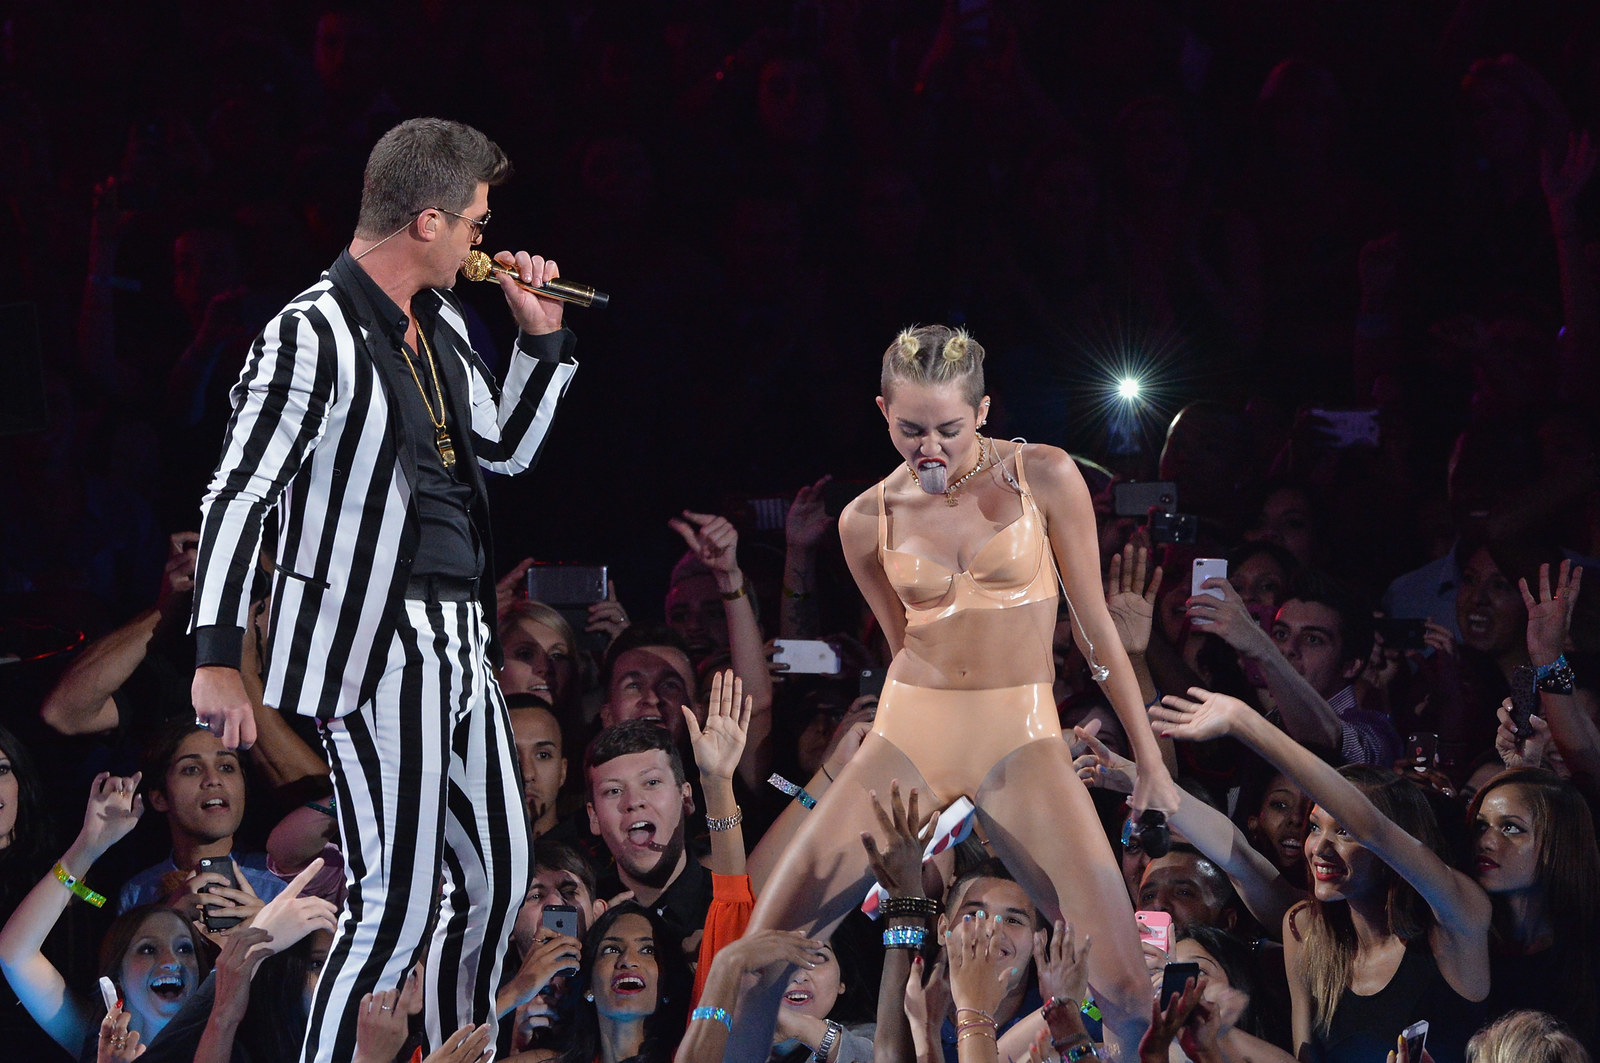 miley and robin on stage